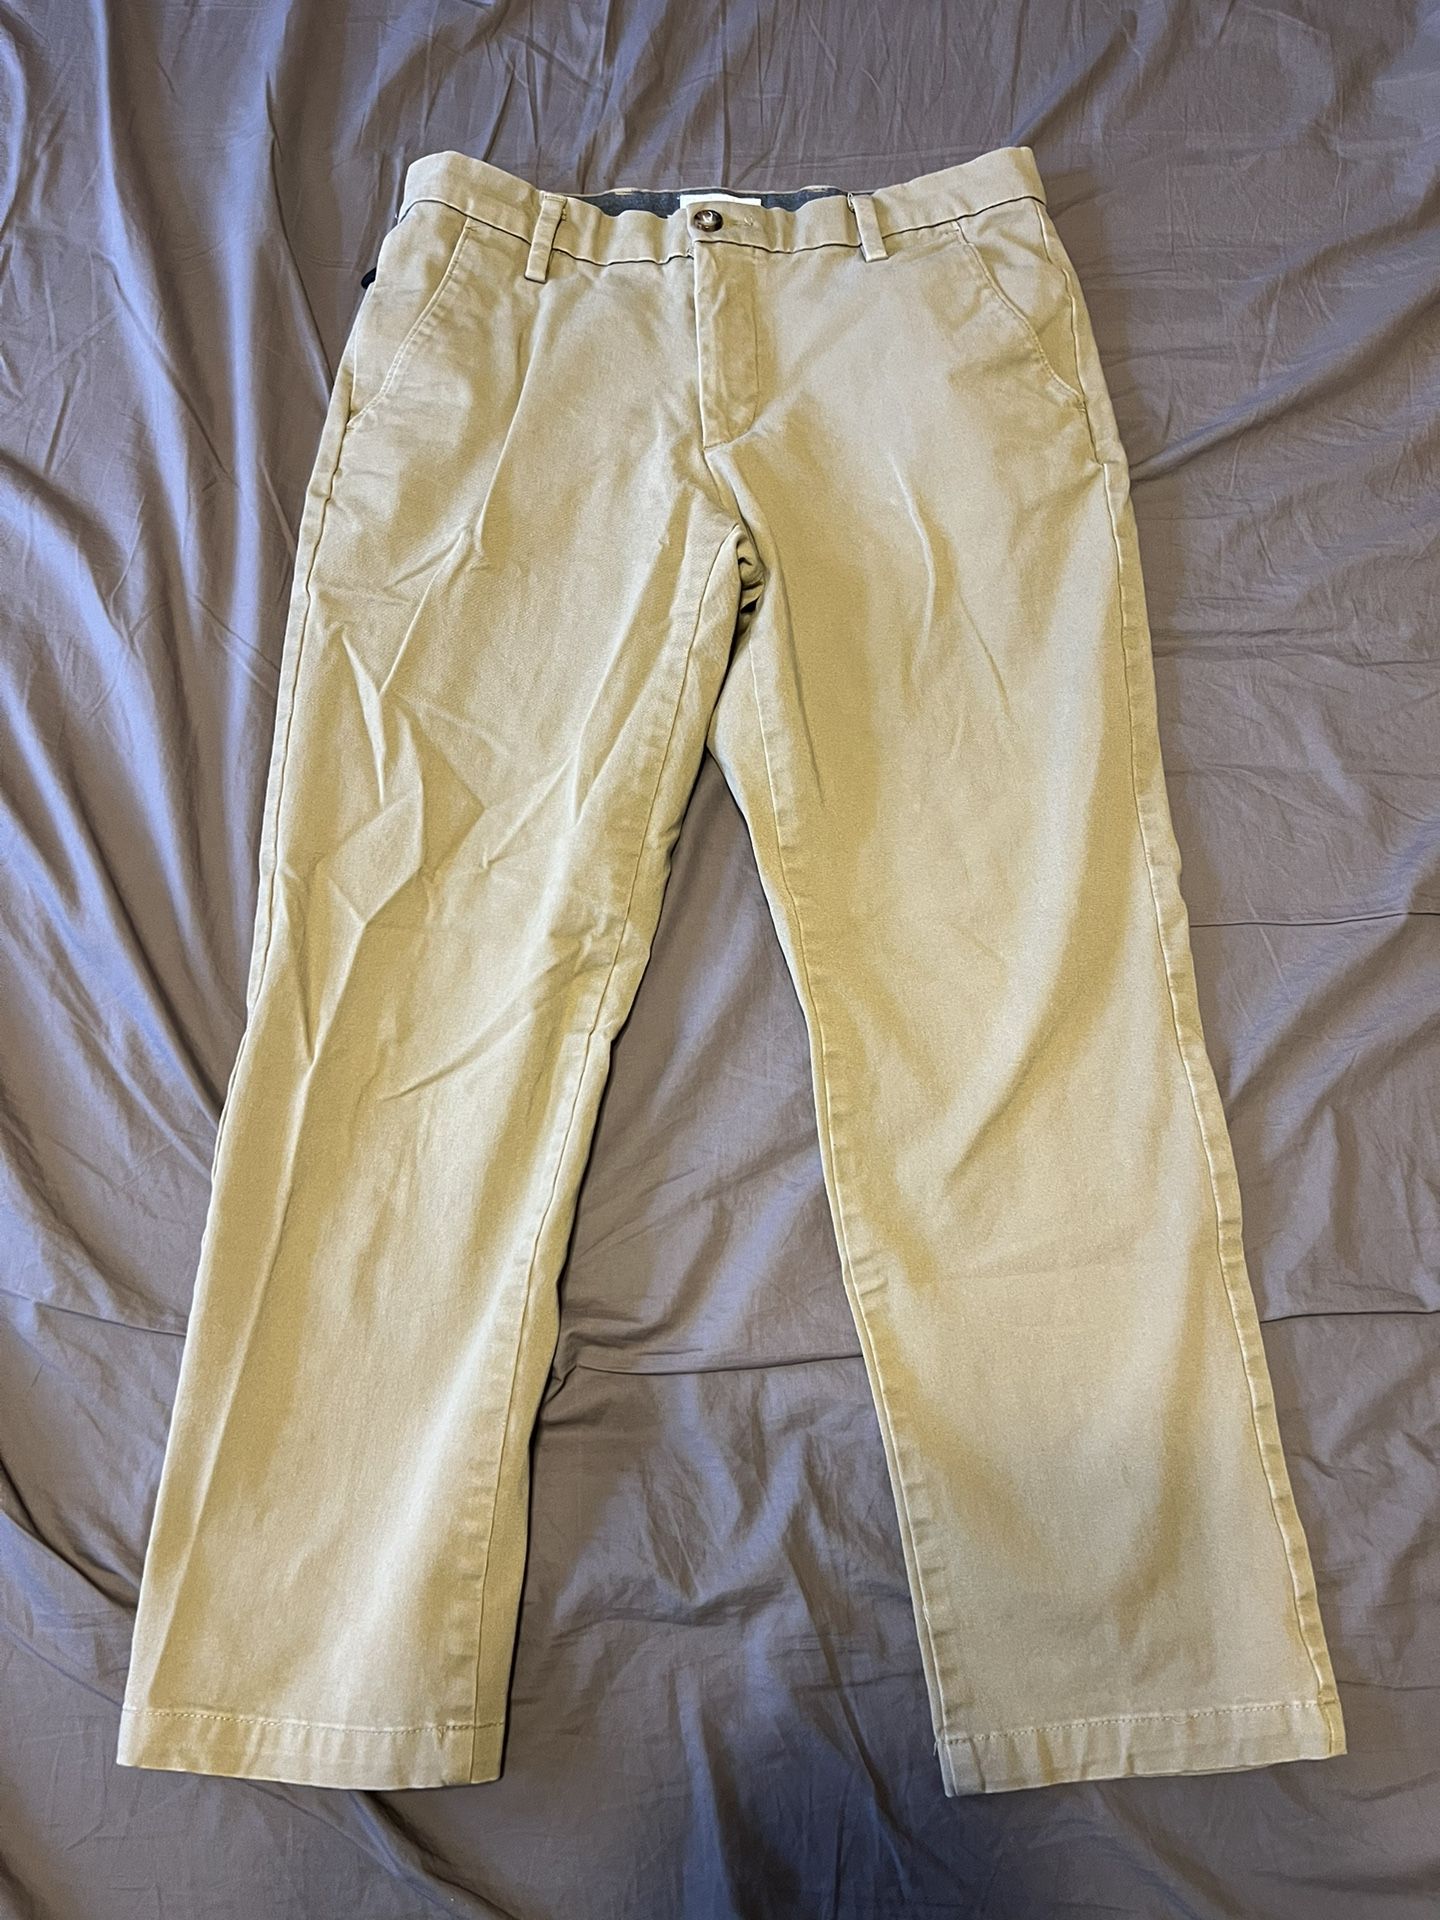 Dockers Slim Tapered Khakis for Sale in Ellington, CT - OfferUp